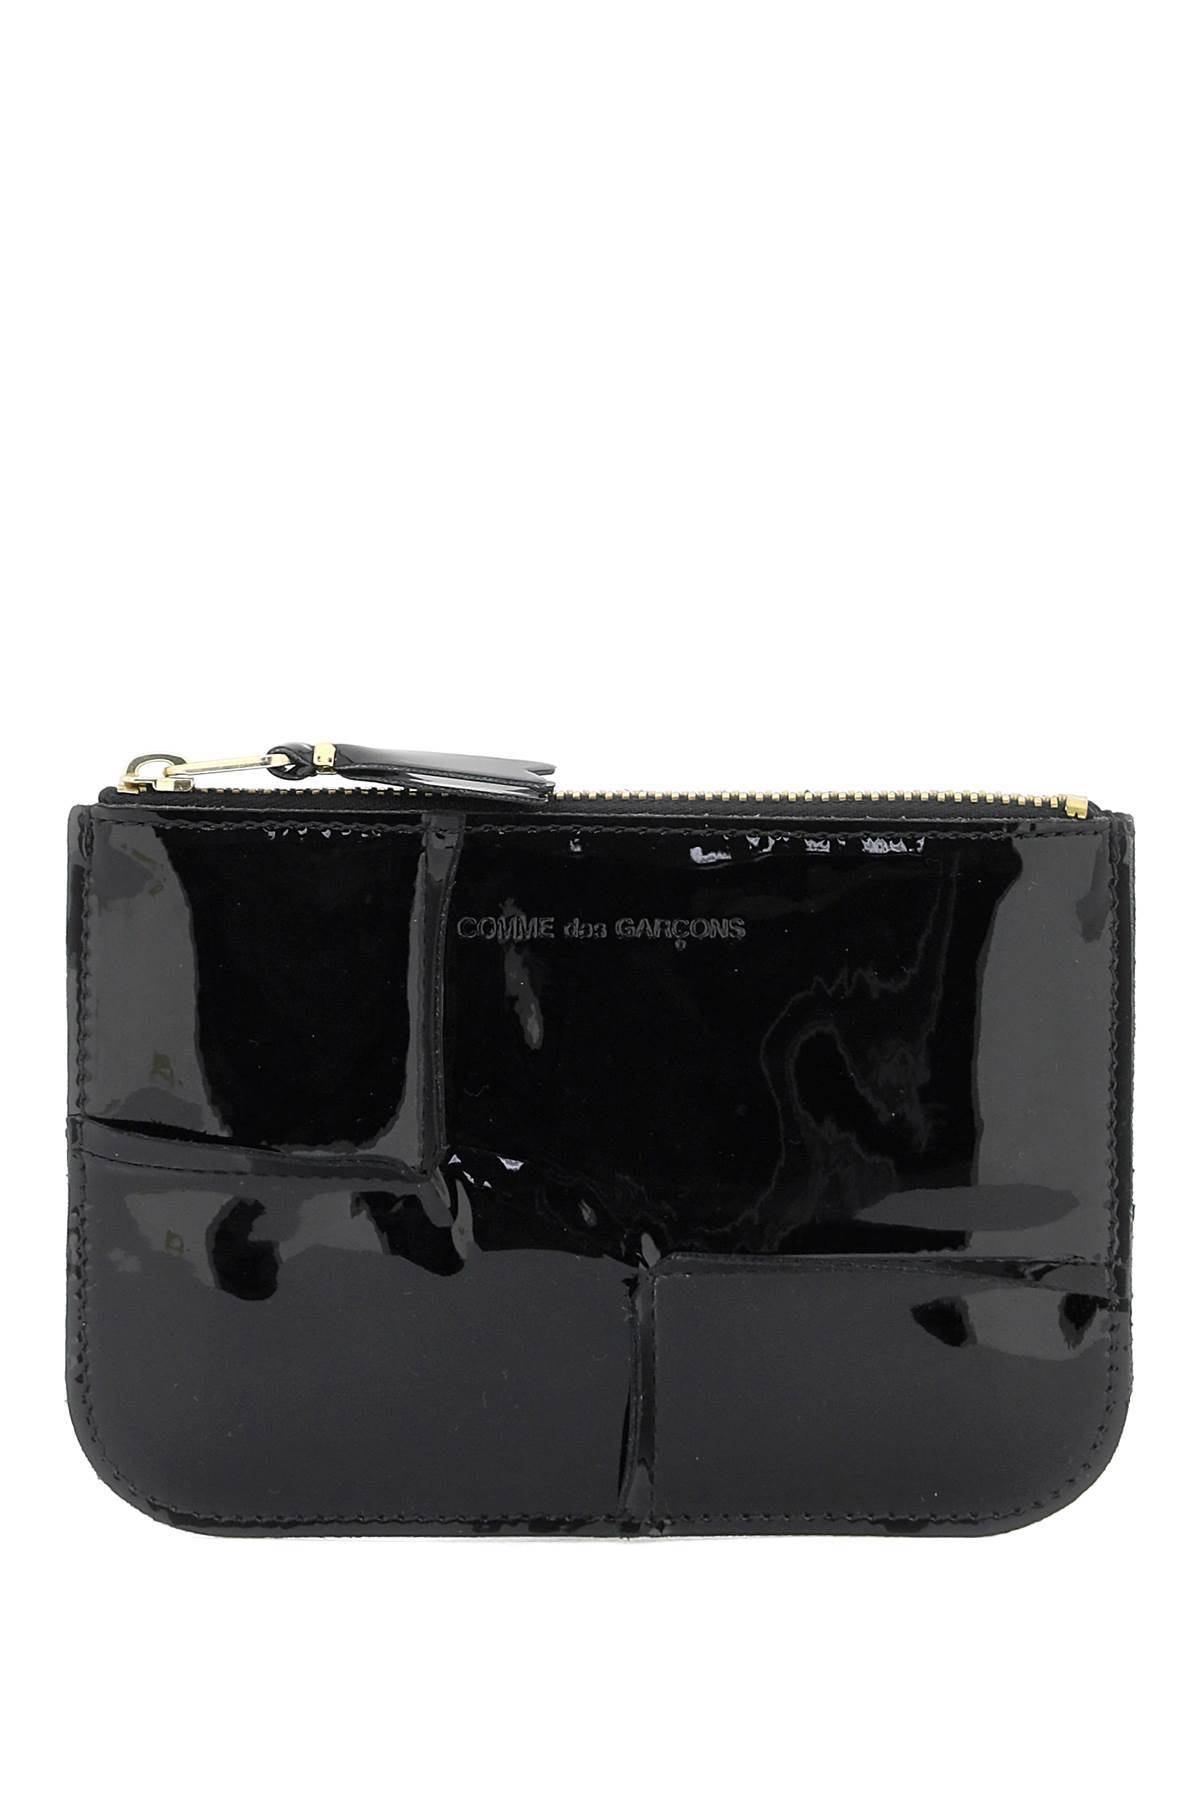 COMME DES GARCONS WALLET COMME DES GARCONS WALLET zip around patent leather wallet with zipper